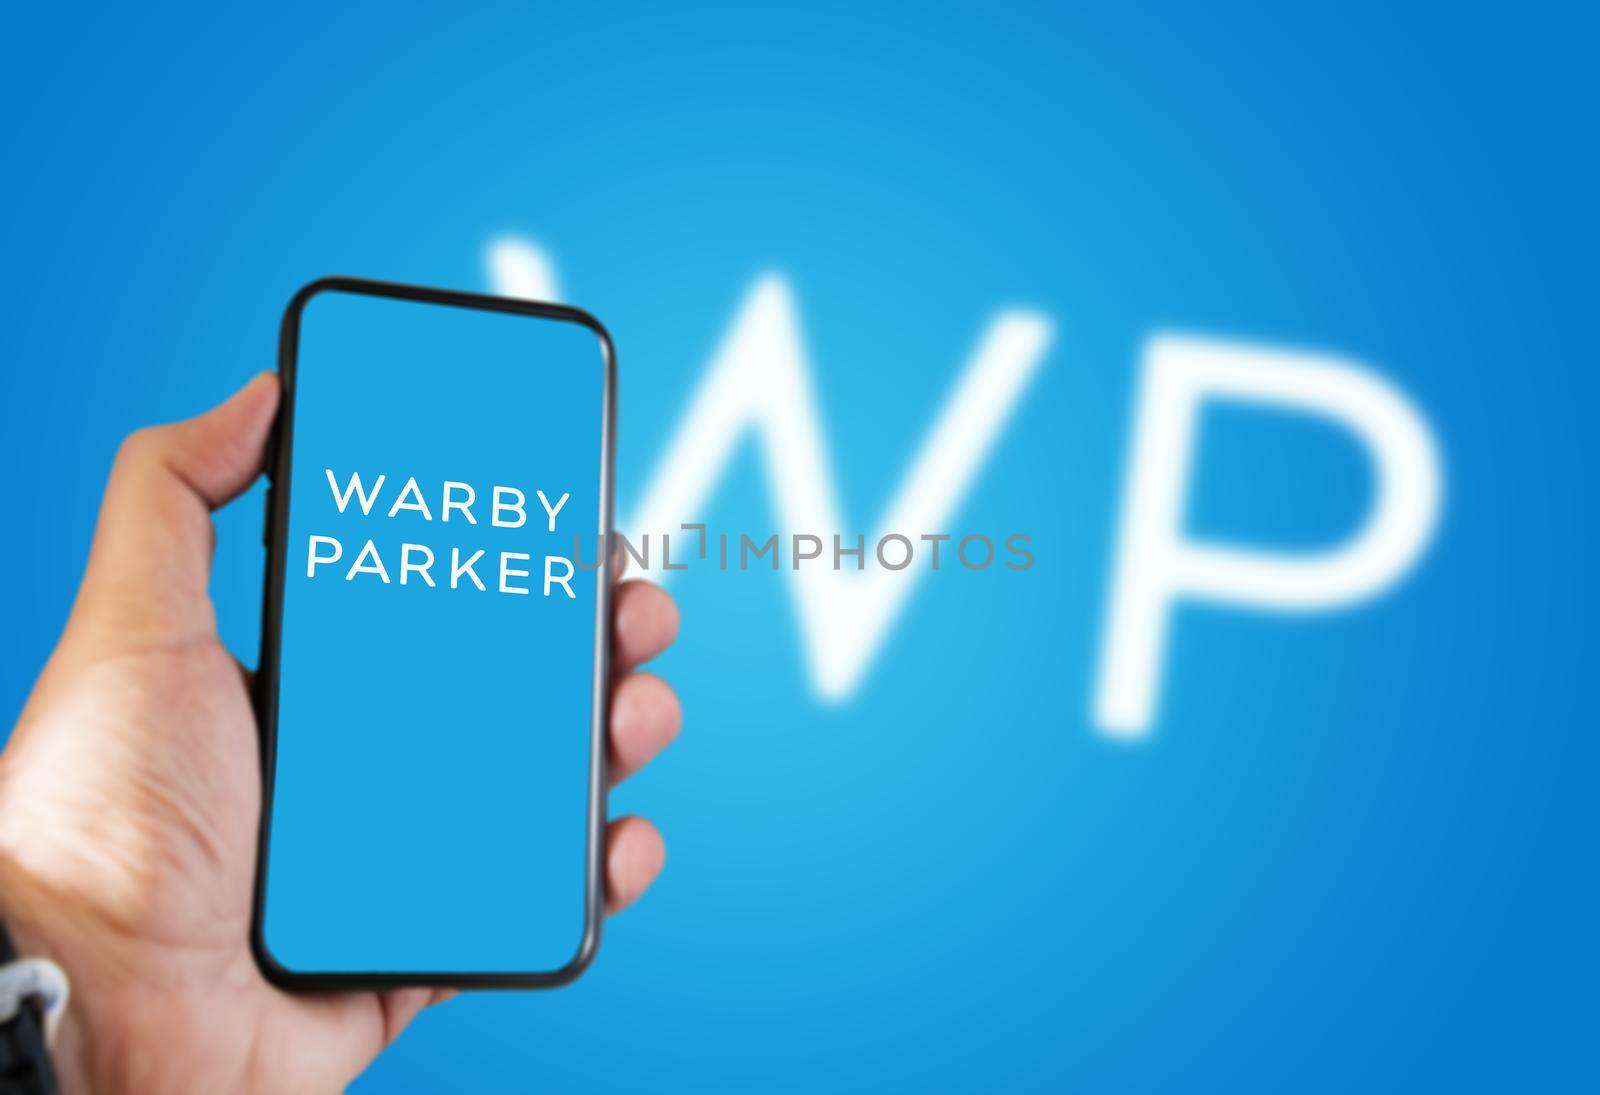 New York, USA, September 2021: hand holding a phone with the Warby Parker mobile app on the screen by rarrarorro